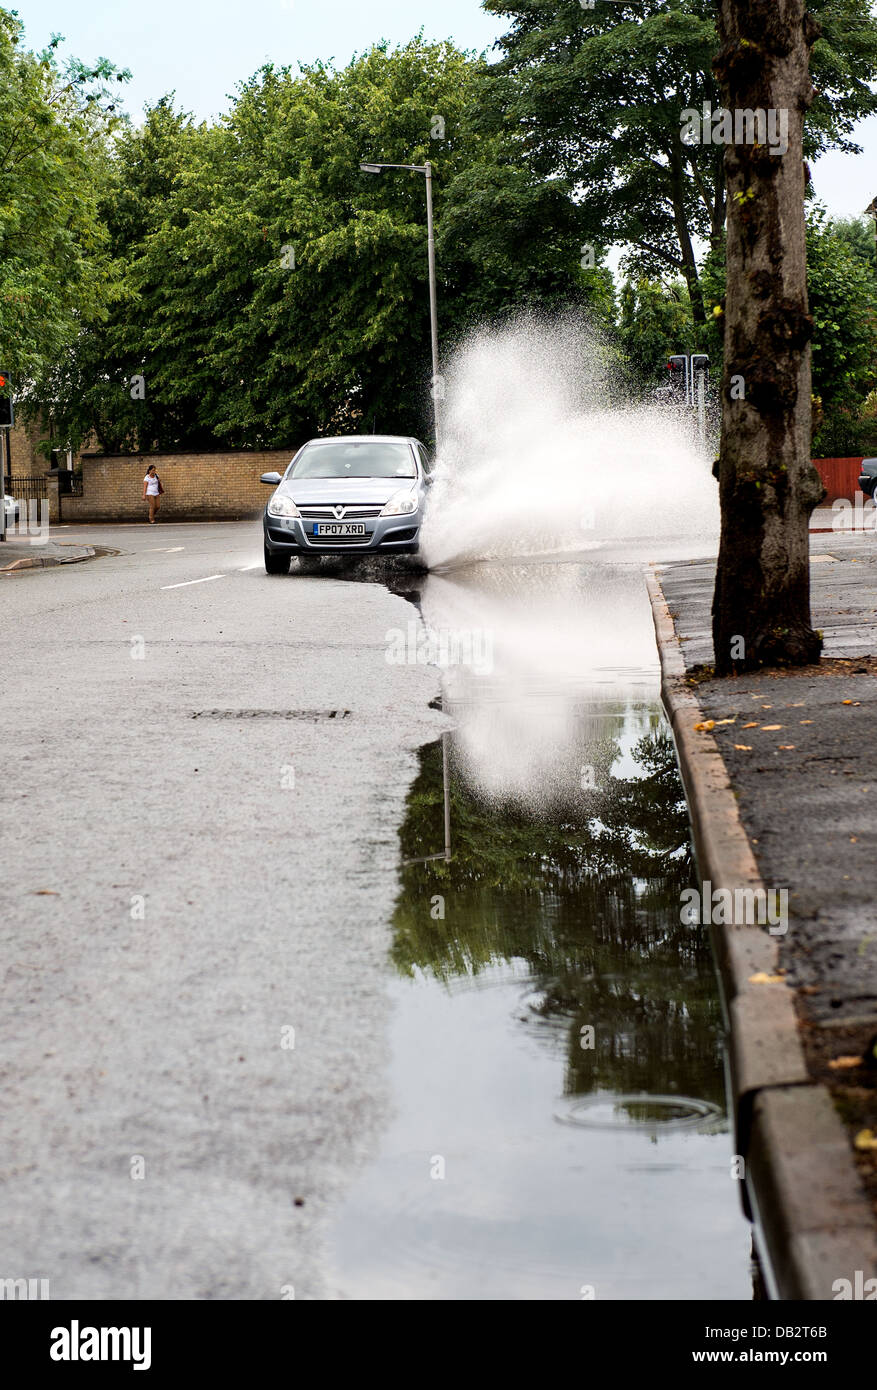 A car drives through a puddle following a period of torrential rain. Stock Photo